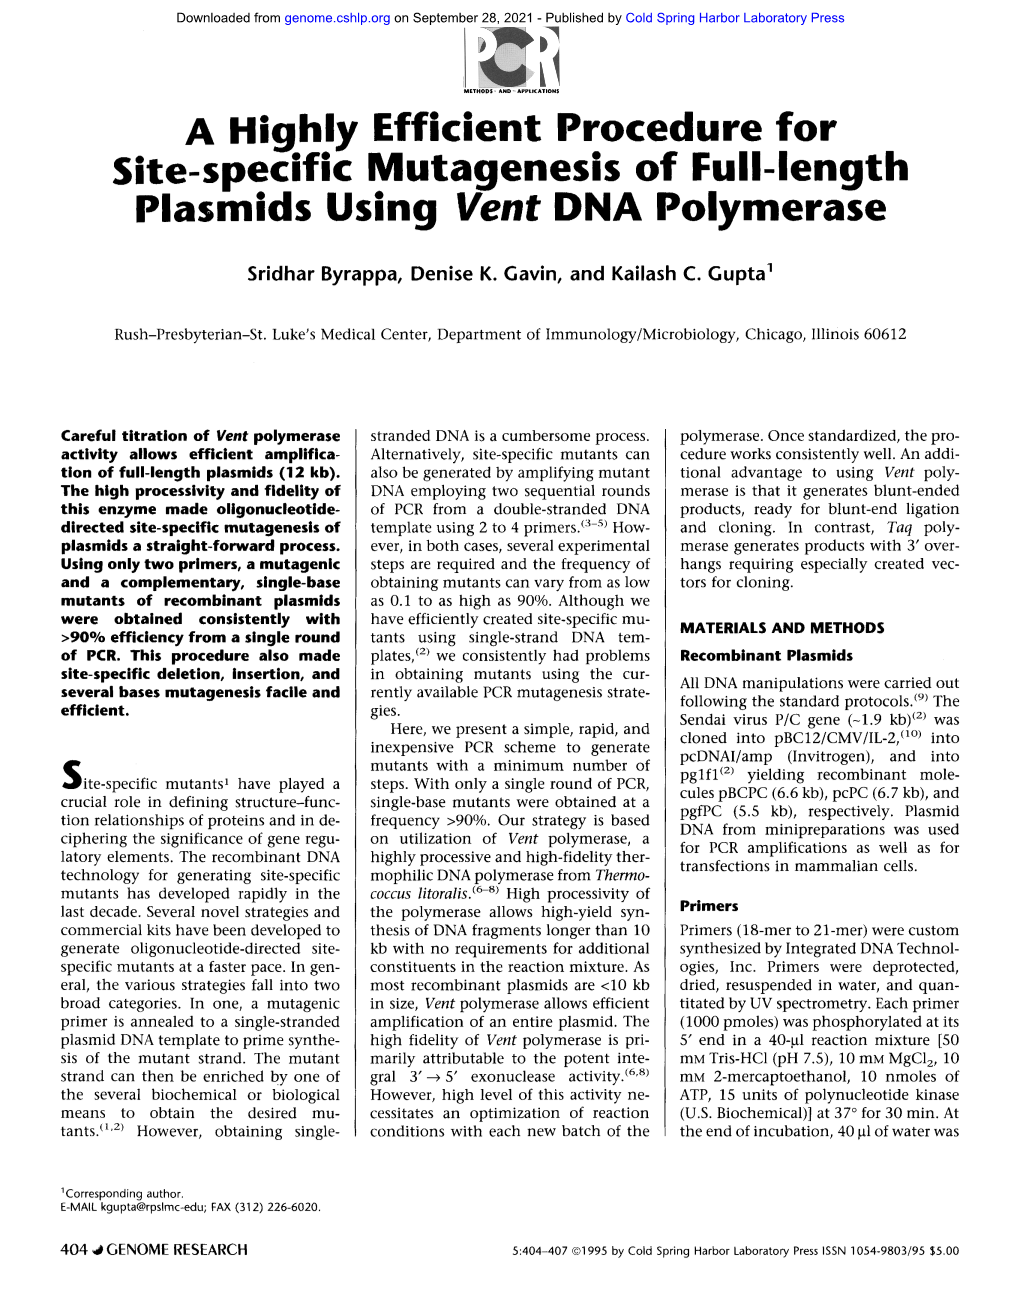 A Highly Efficient Procedure for Plasmids Using Vent DNA Polymerase